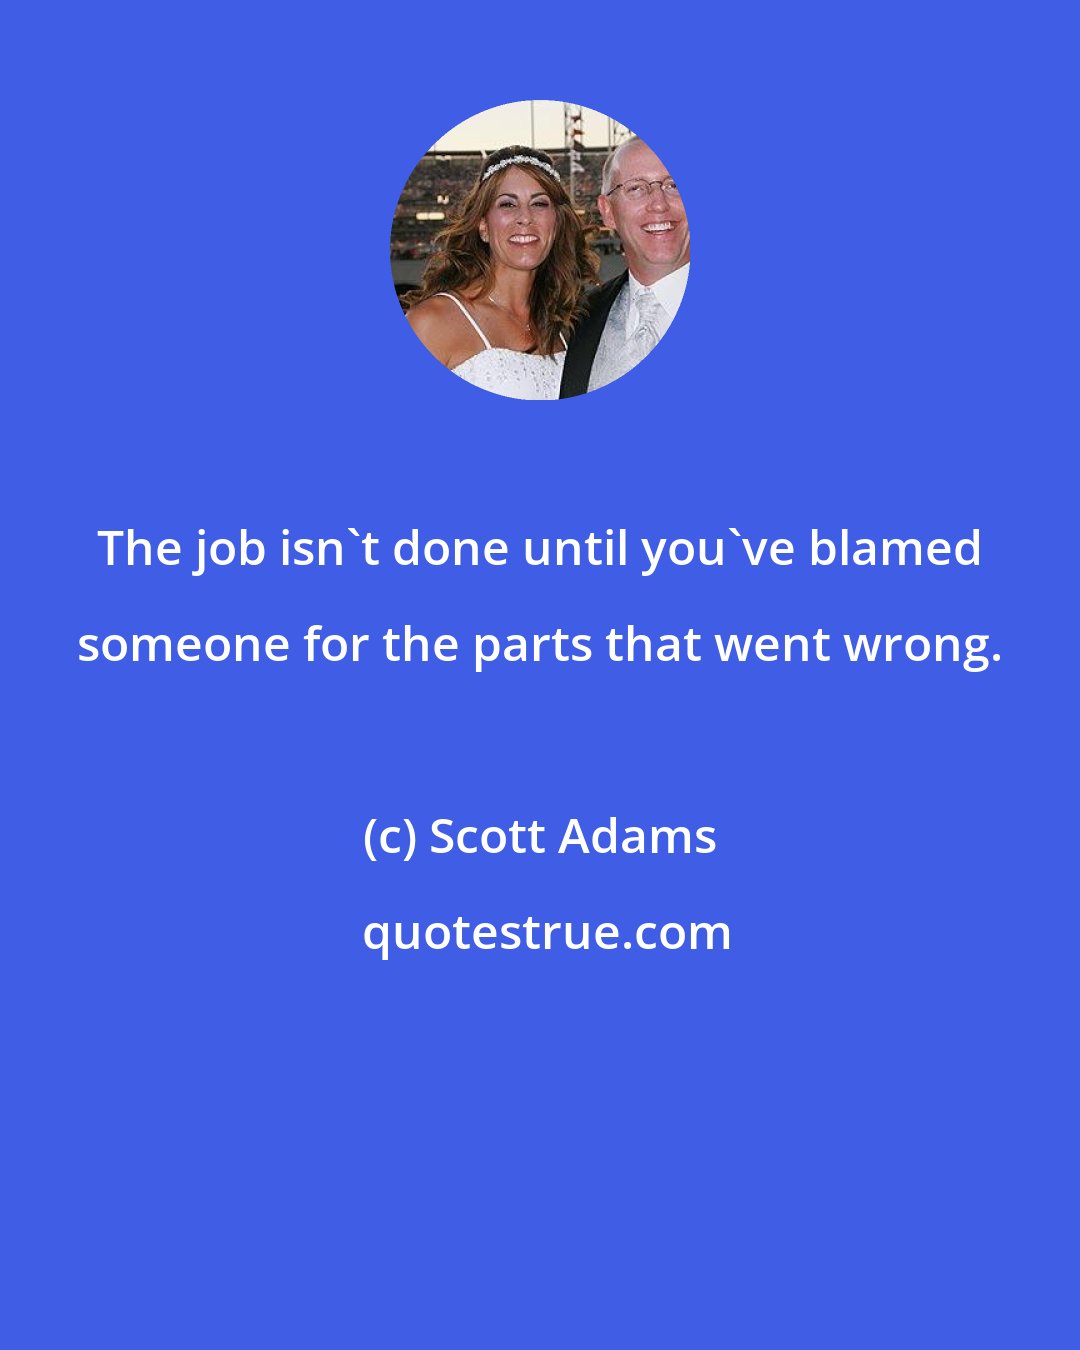 Scott Adams: The job isn't done until you've blamed someone for the parts that went wrong.